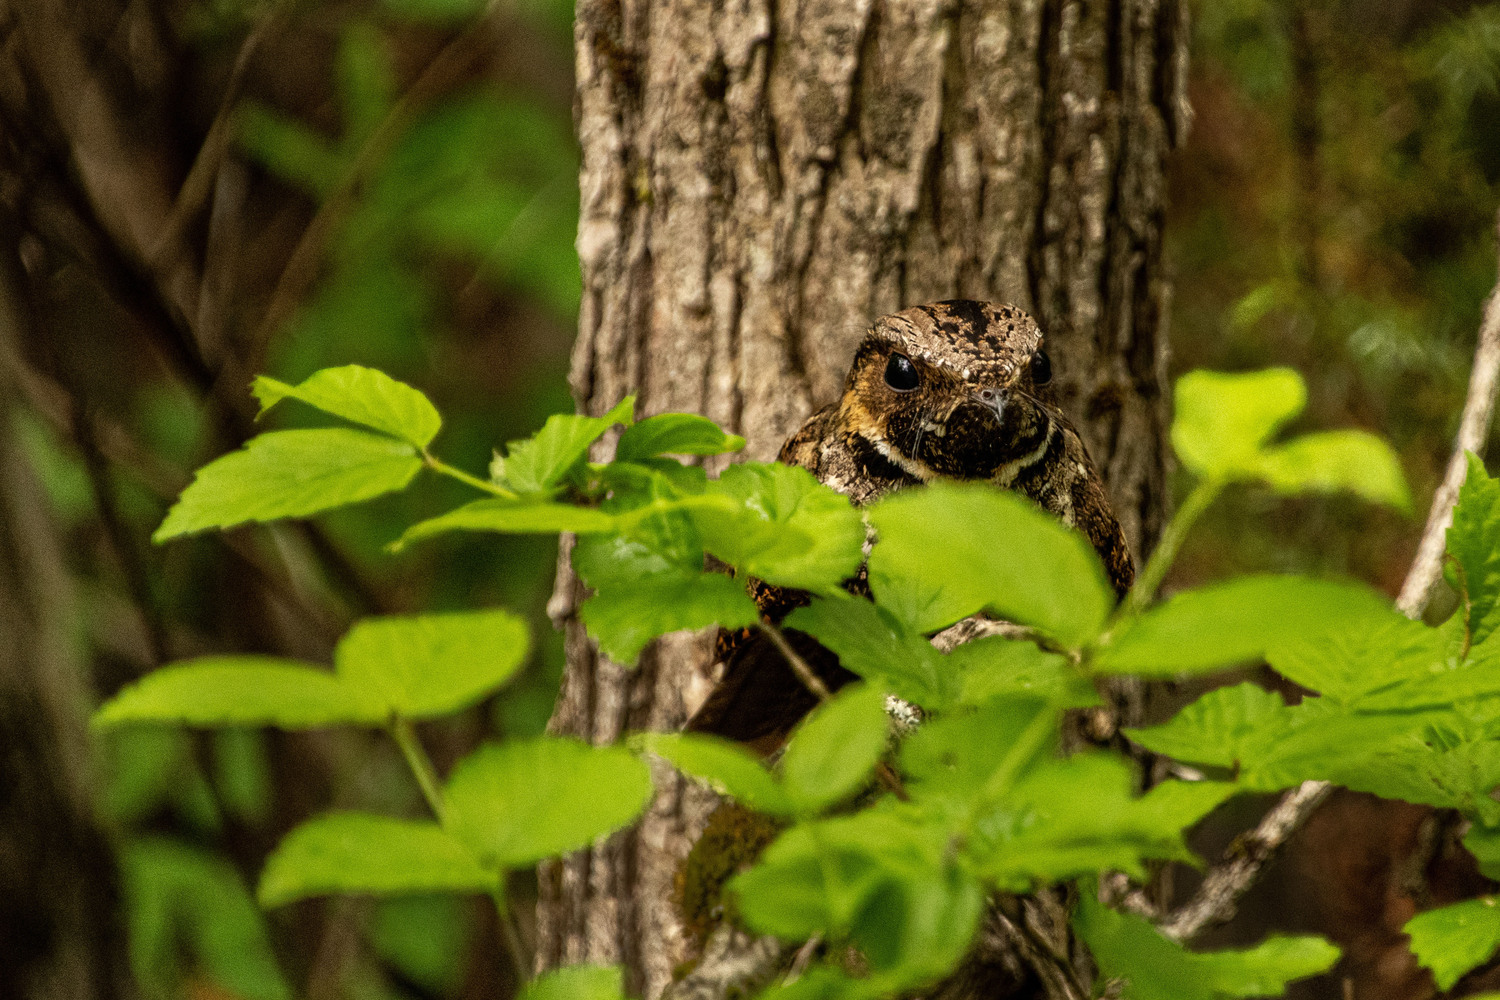 An Eastern whippoorwill perched in a tree.  Whippoorwills are often heard more than they are seen due to their camouflage coloring.